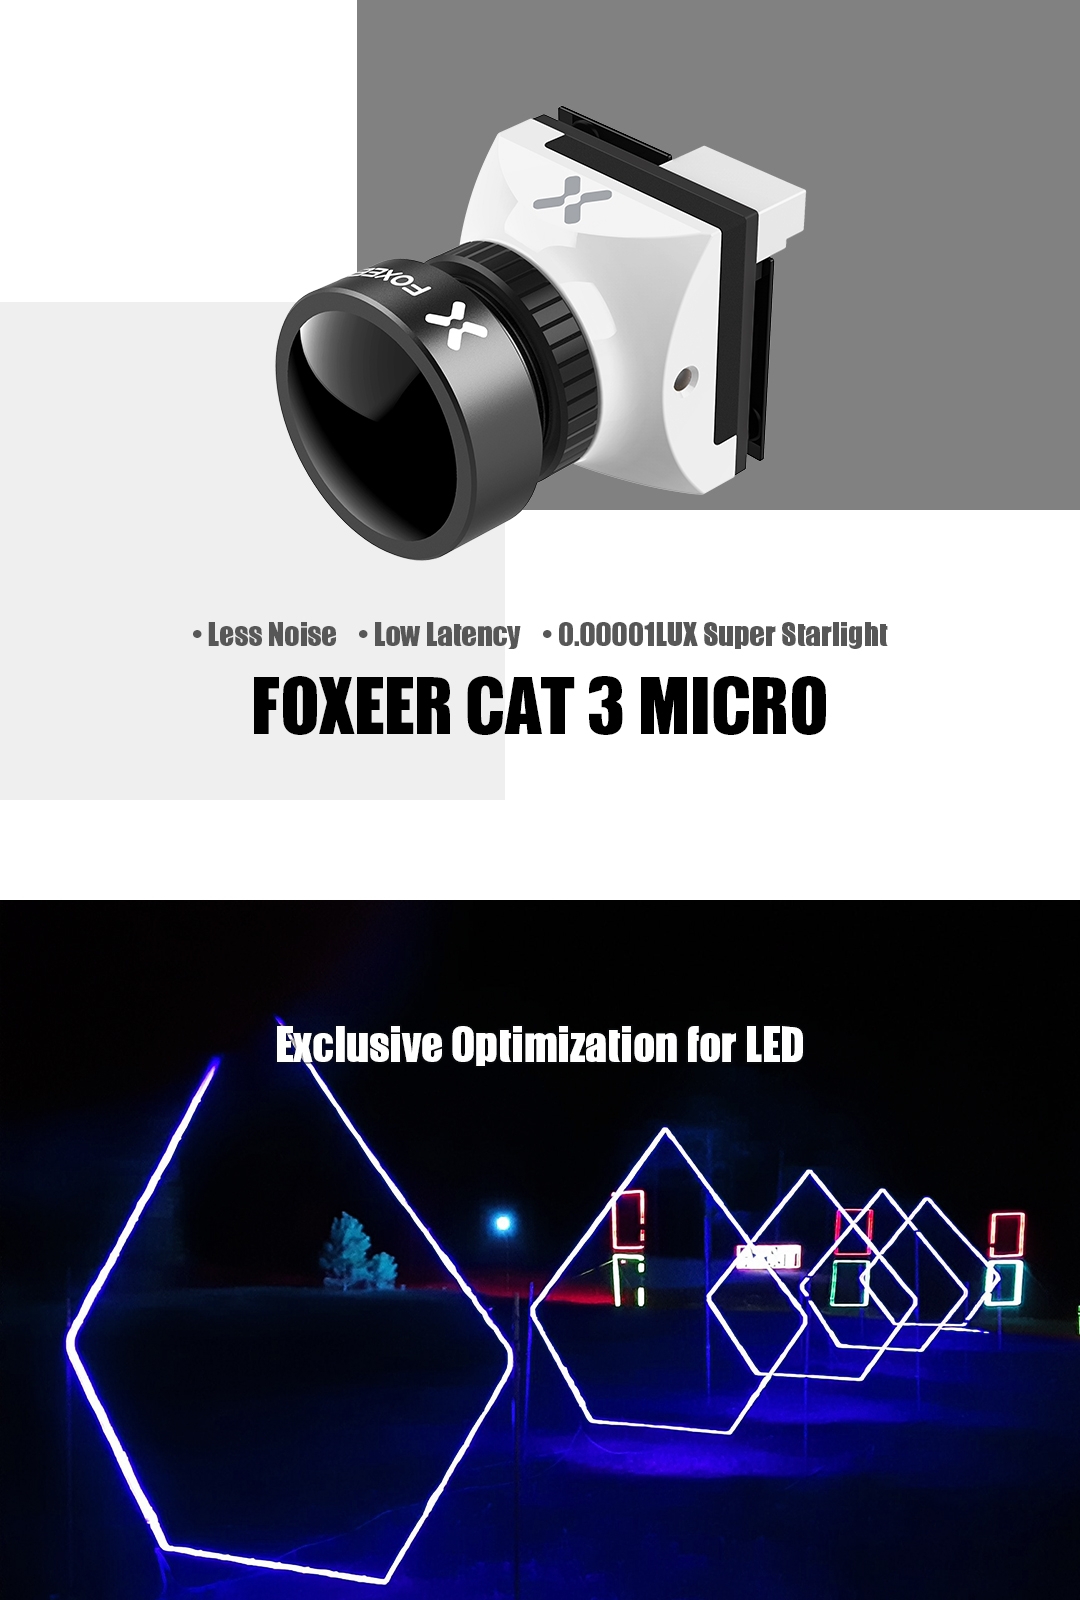 Foxeer Micro Cat 3 1200TVL 0.00001lux Low Light Night FPV Camera Support OSD & Menu Remote for FPV Racing RC Drone Black/White